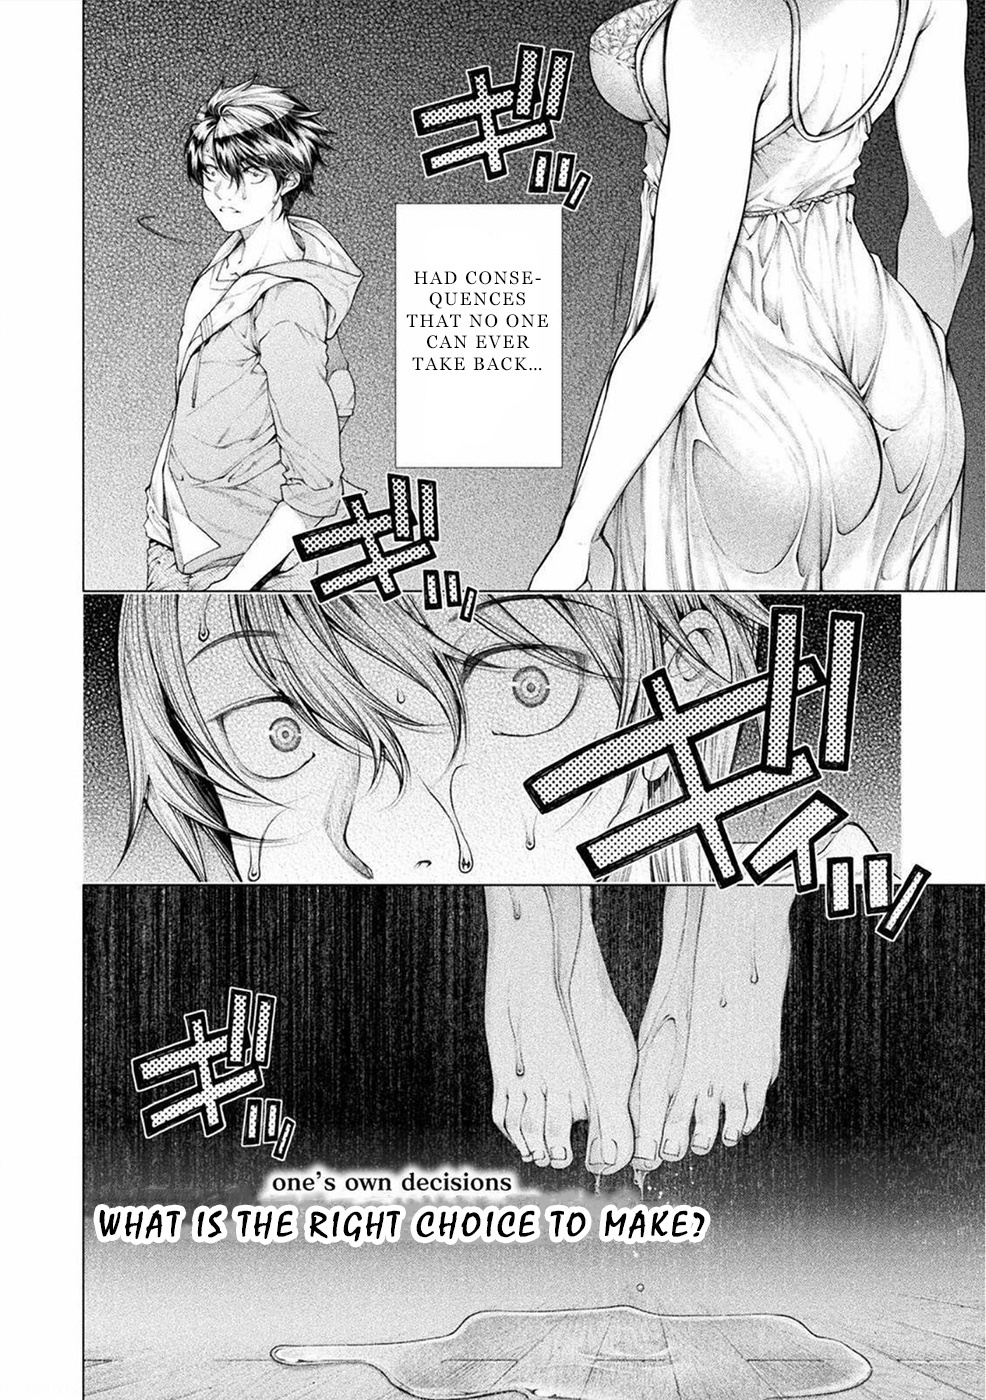 Lovetrap Island - Passion In Distant Lands - Chapter 6 #2